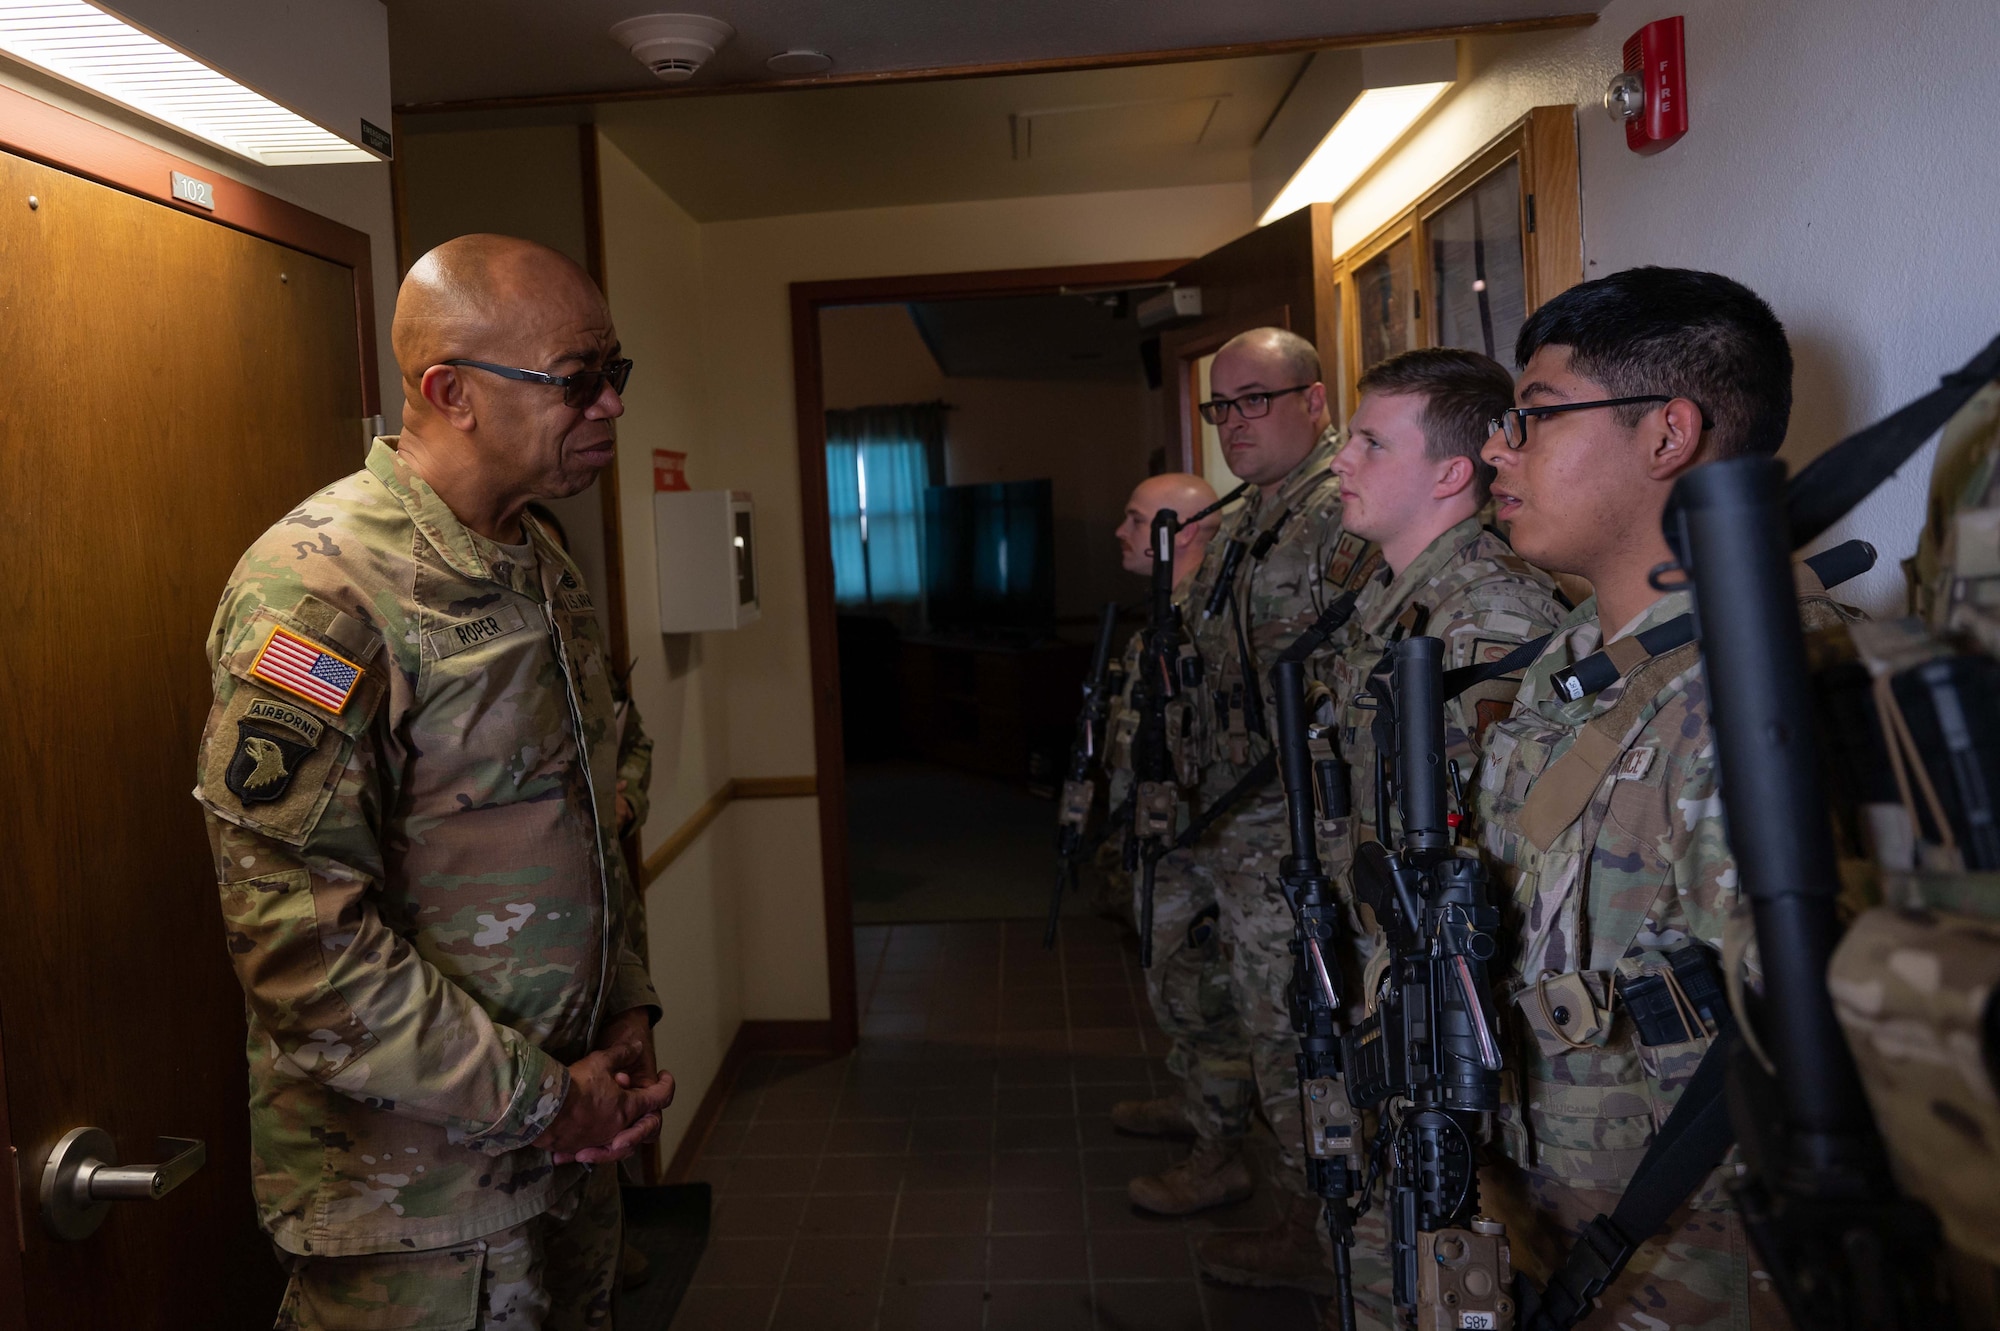 U.S. Army Lt. Gen. A.C. Roper, deputy commander of U.S. Northern Command, speaks with defenders in the 890th Missile Security Forces Squadron during his trip to the Bravo-01 missile alert facility near Bushnell, Nebraska, June 13, 2023. The defenders provided Roper a brief about the day-to-day MAF operations in support of homeland defense. 
(U.S. Air Force photo by Senior Airman Sarah Post)